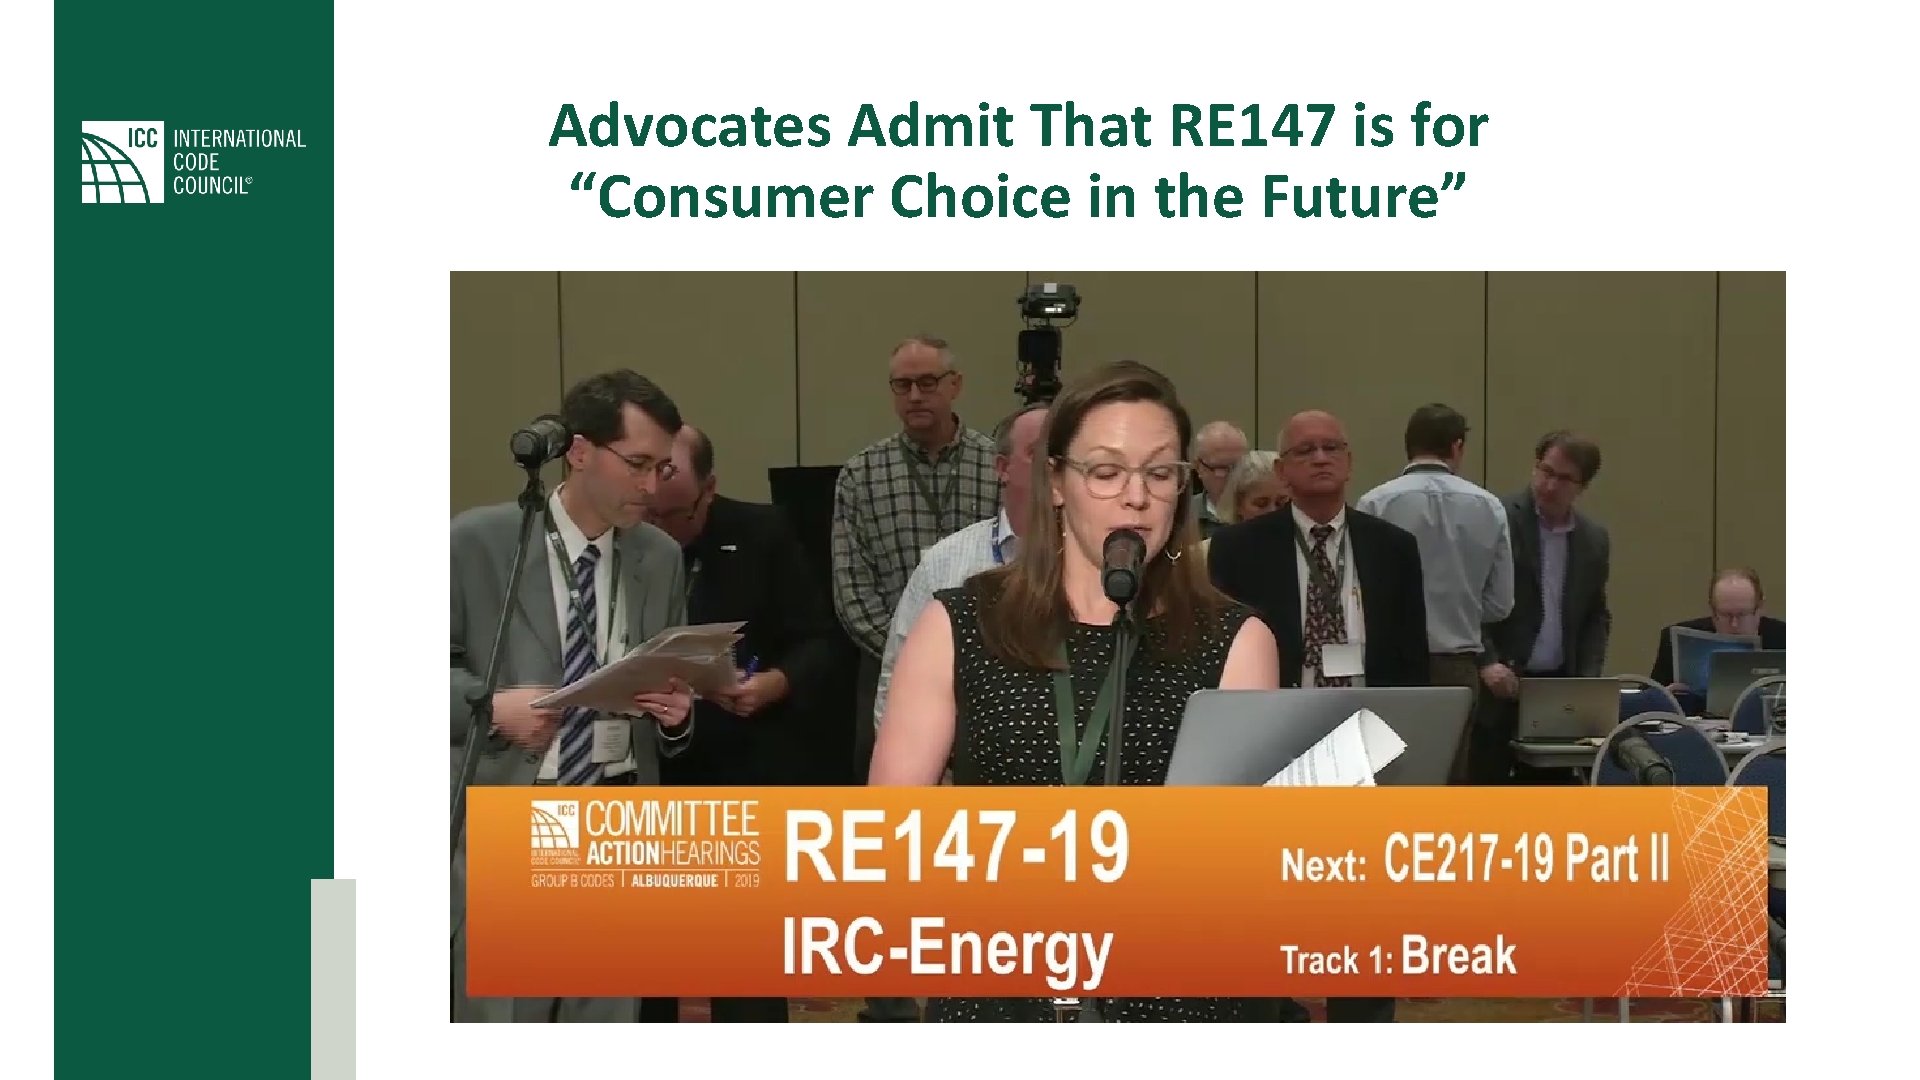 Advocates Admit That RE 147 is for “Consumer Choice in the Future” 